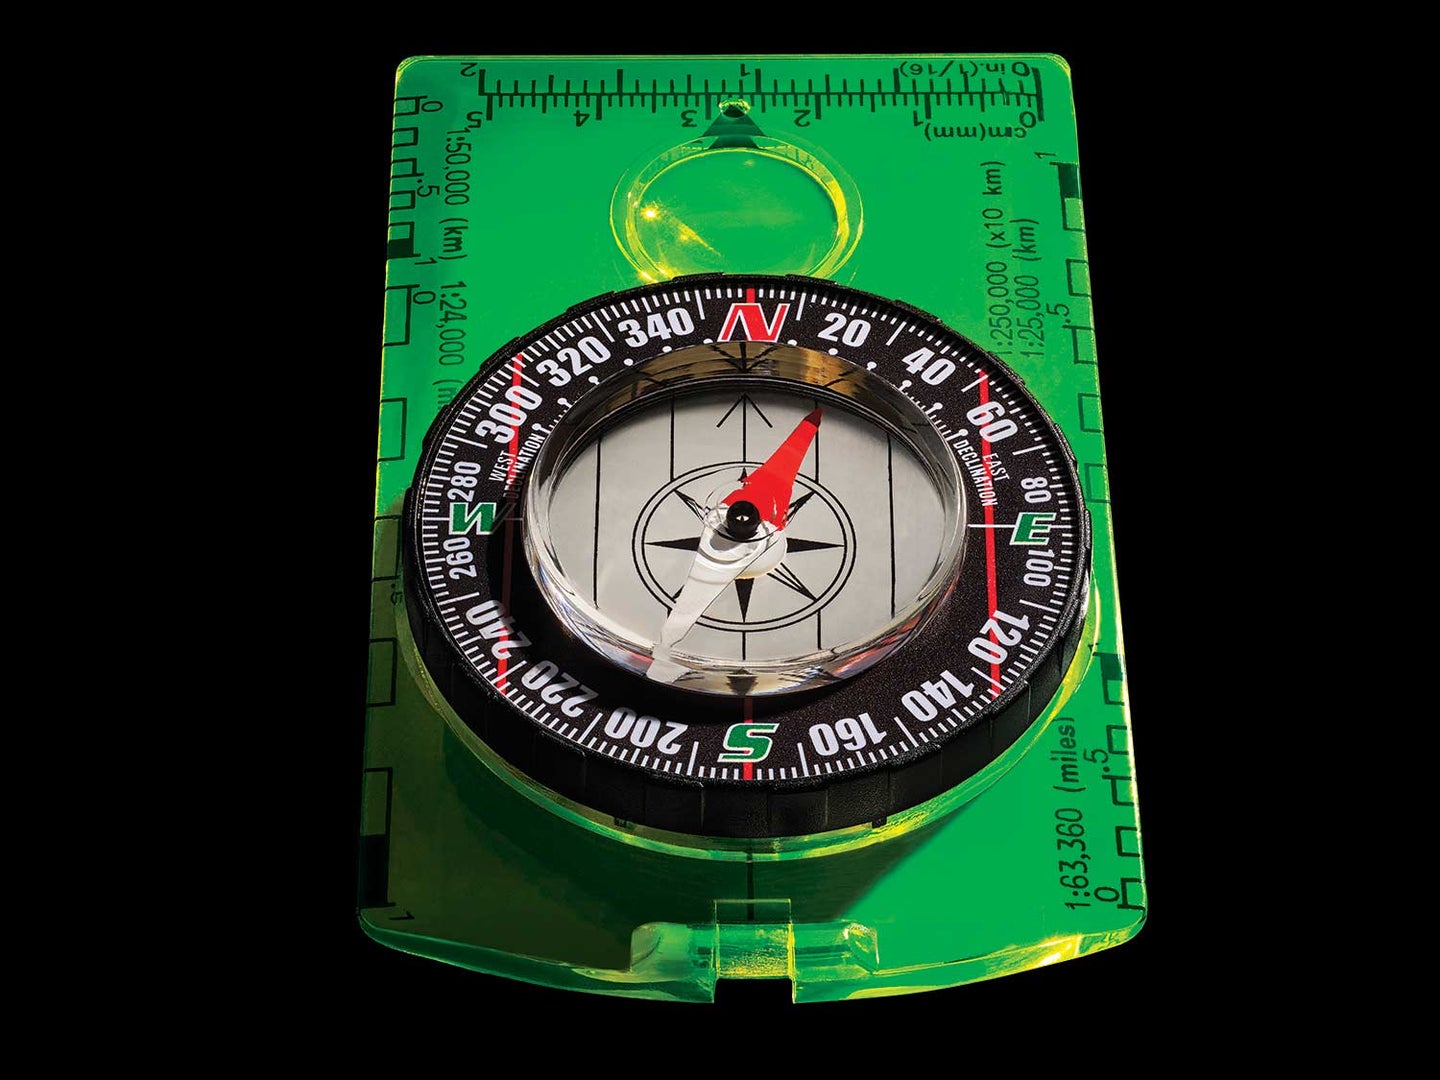 A green compass on a black background.